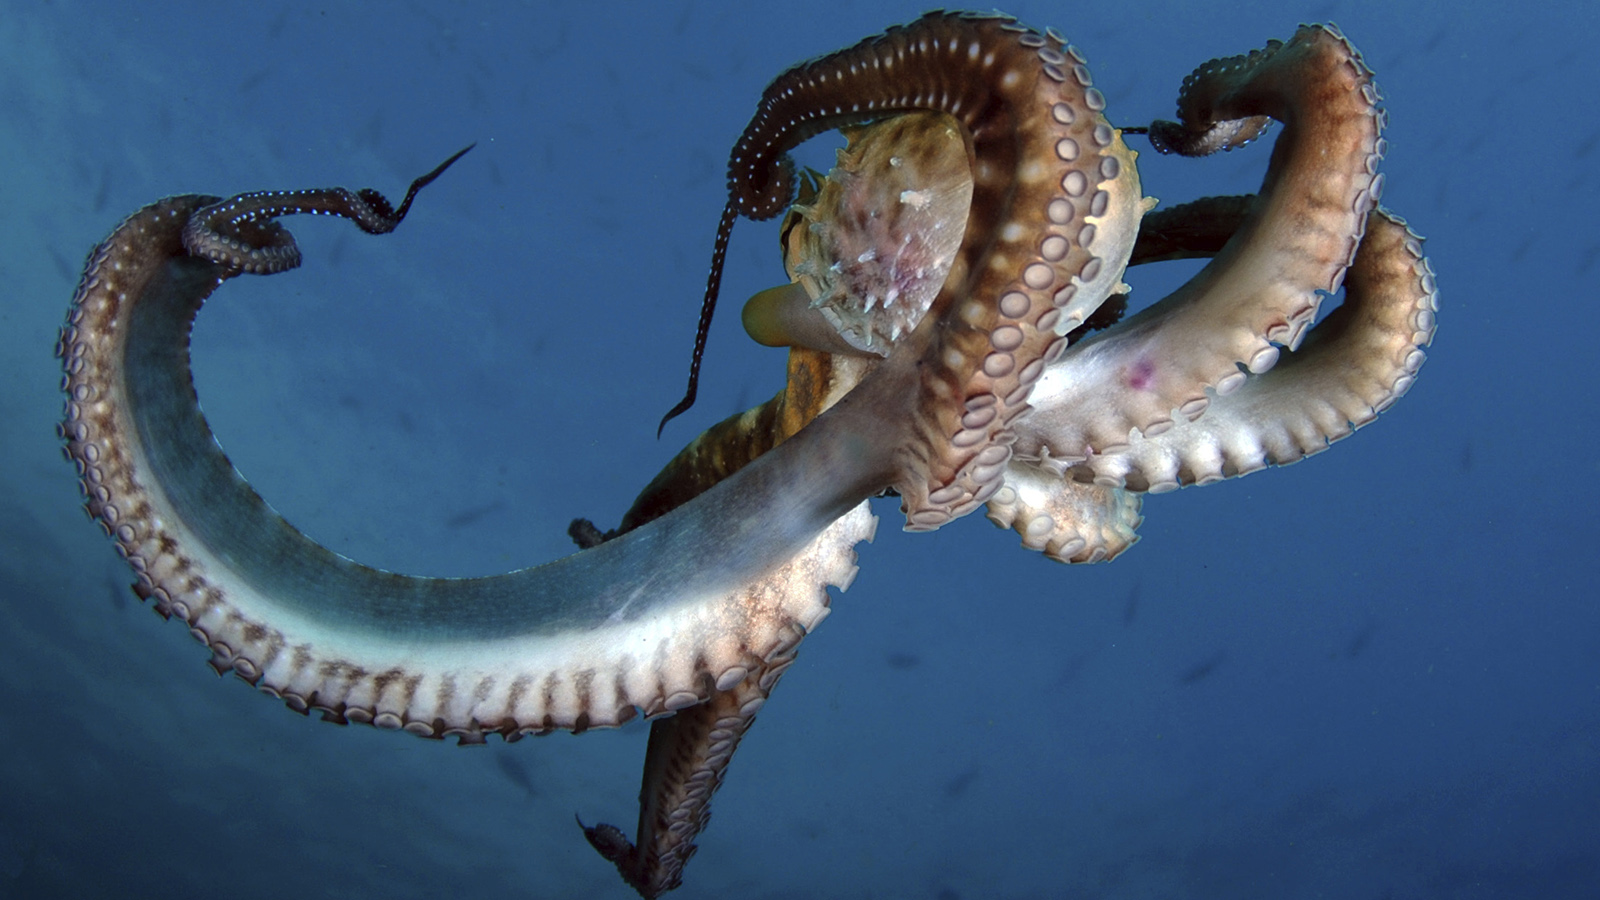 What type of blood does an octopus have?